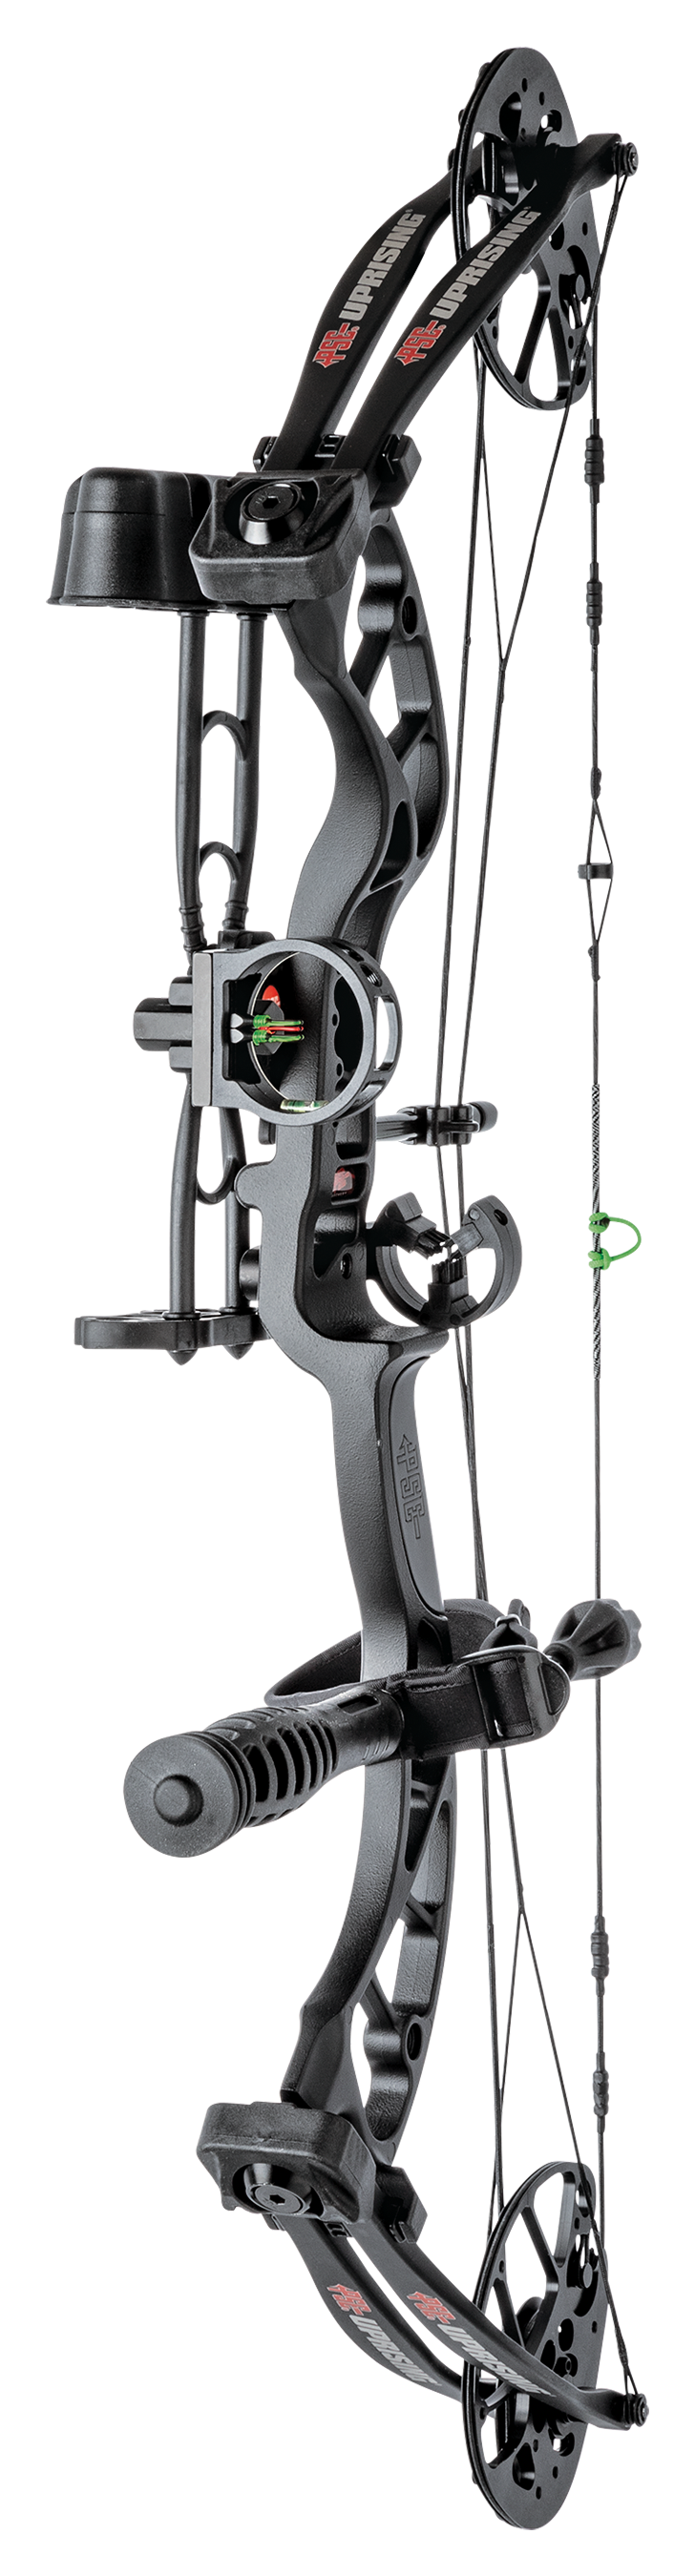 PSE Archery Uprising RTS Compound Bow Package - Black - Right Hand